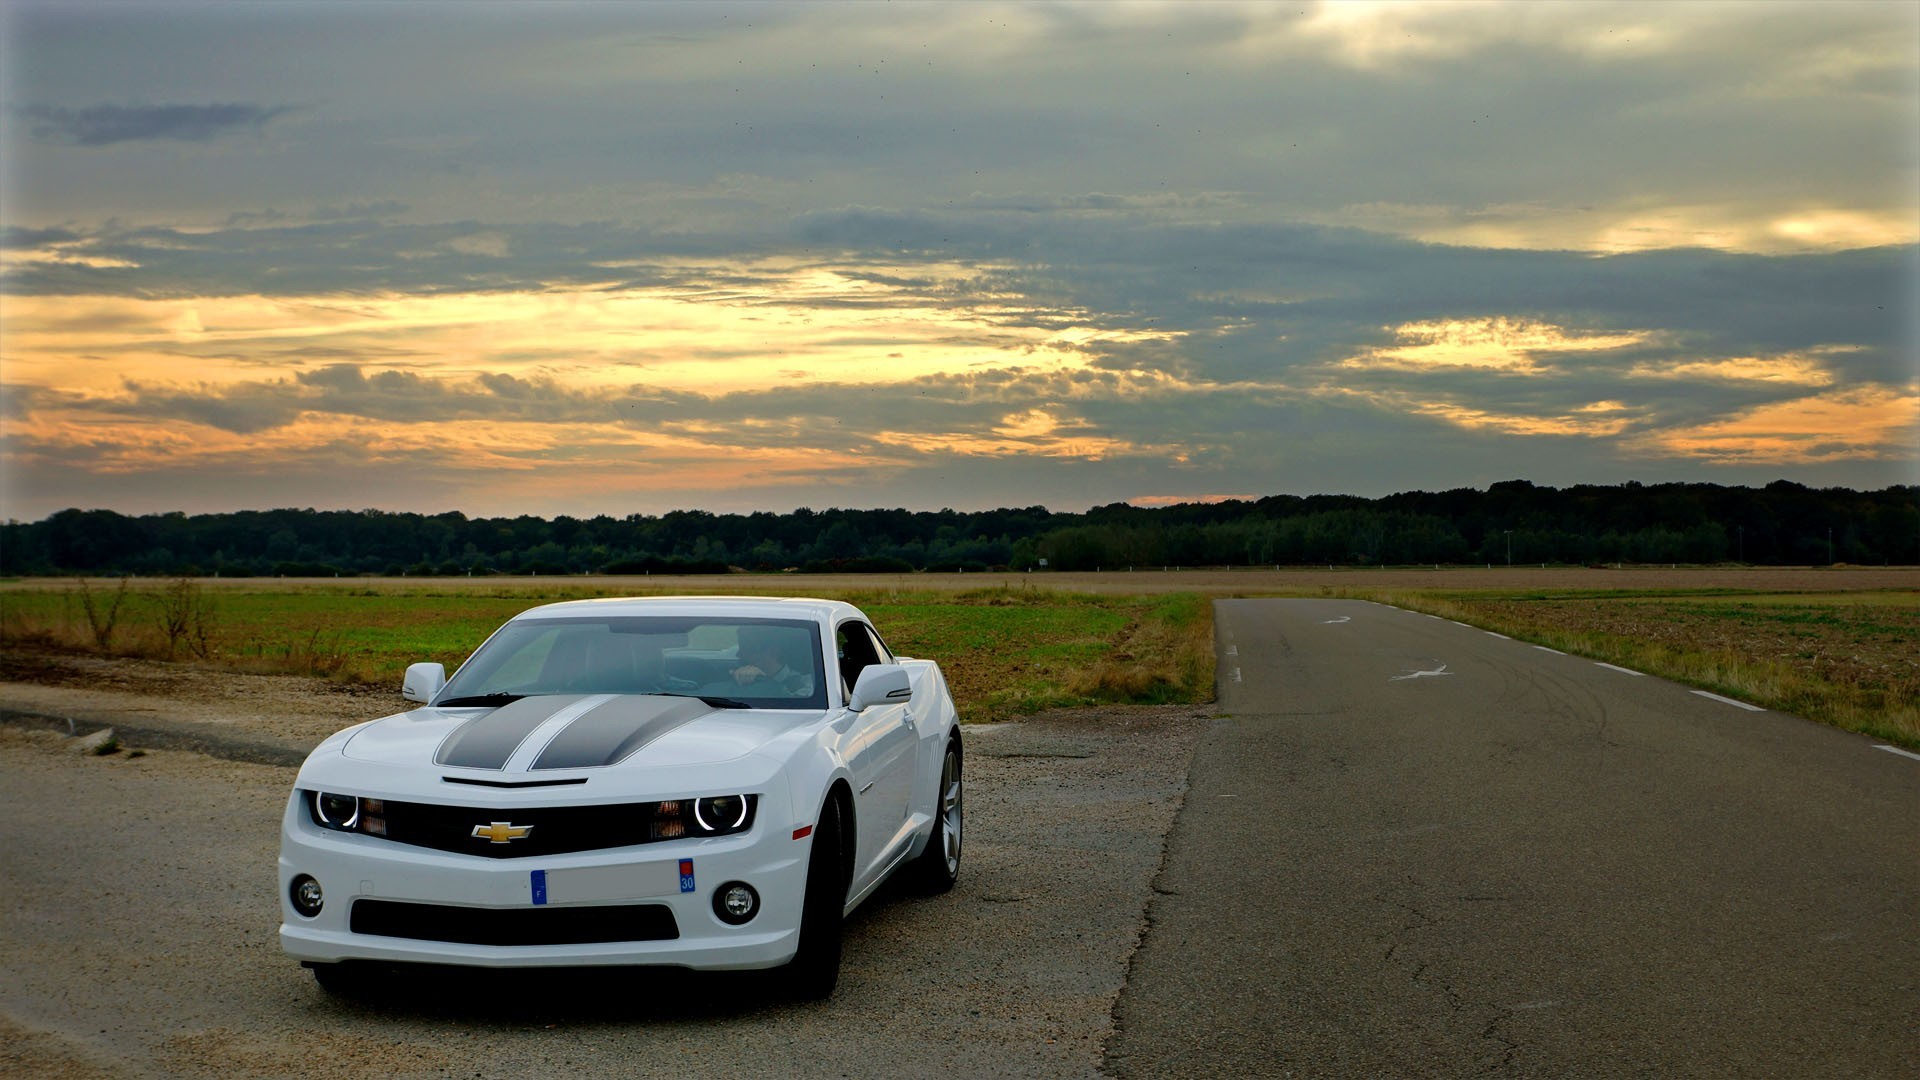 General 1920x1080 Chevrolet American cars Chevrolet Camaro car white cars vehicle muscle cars